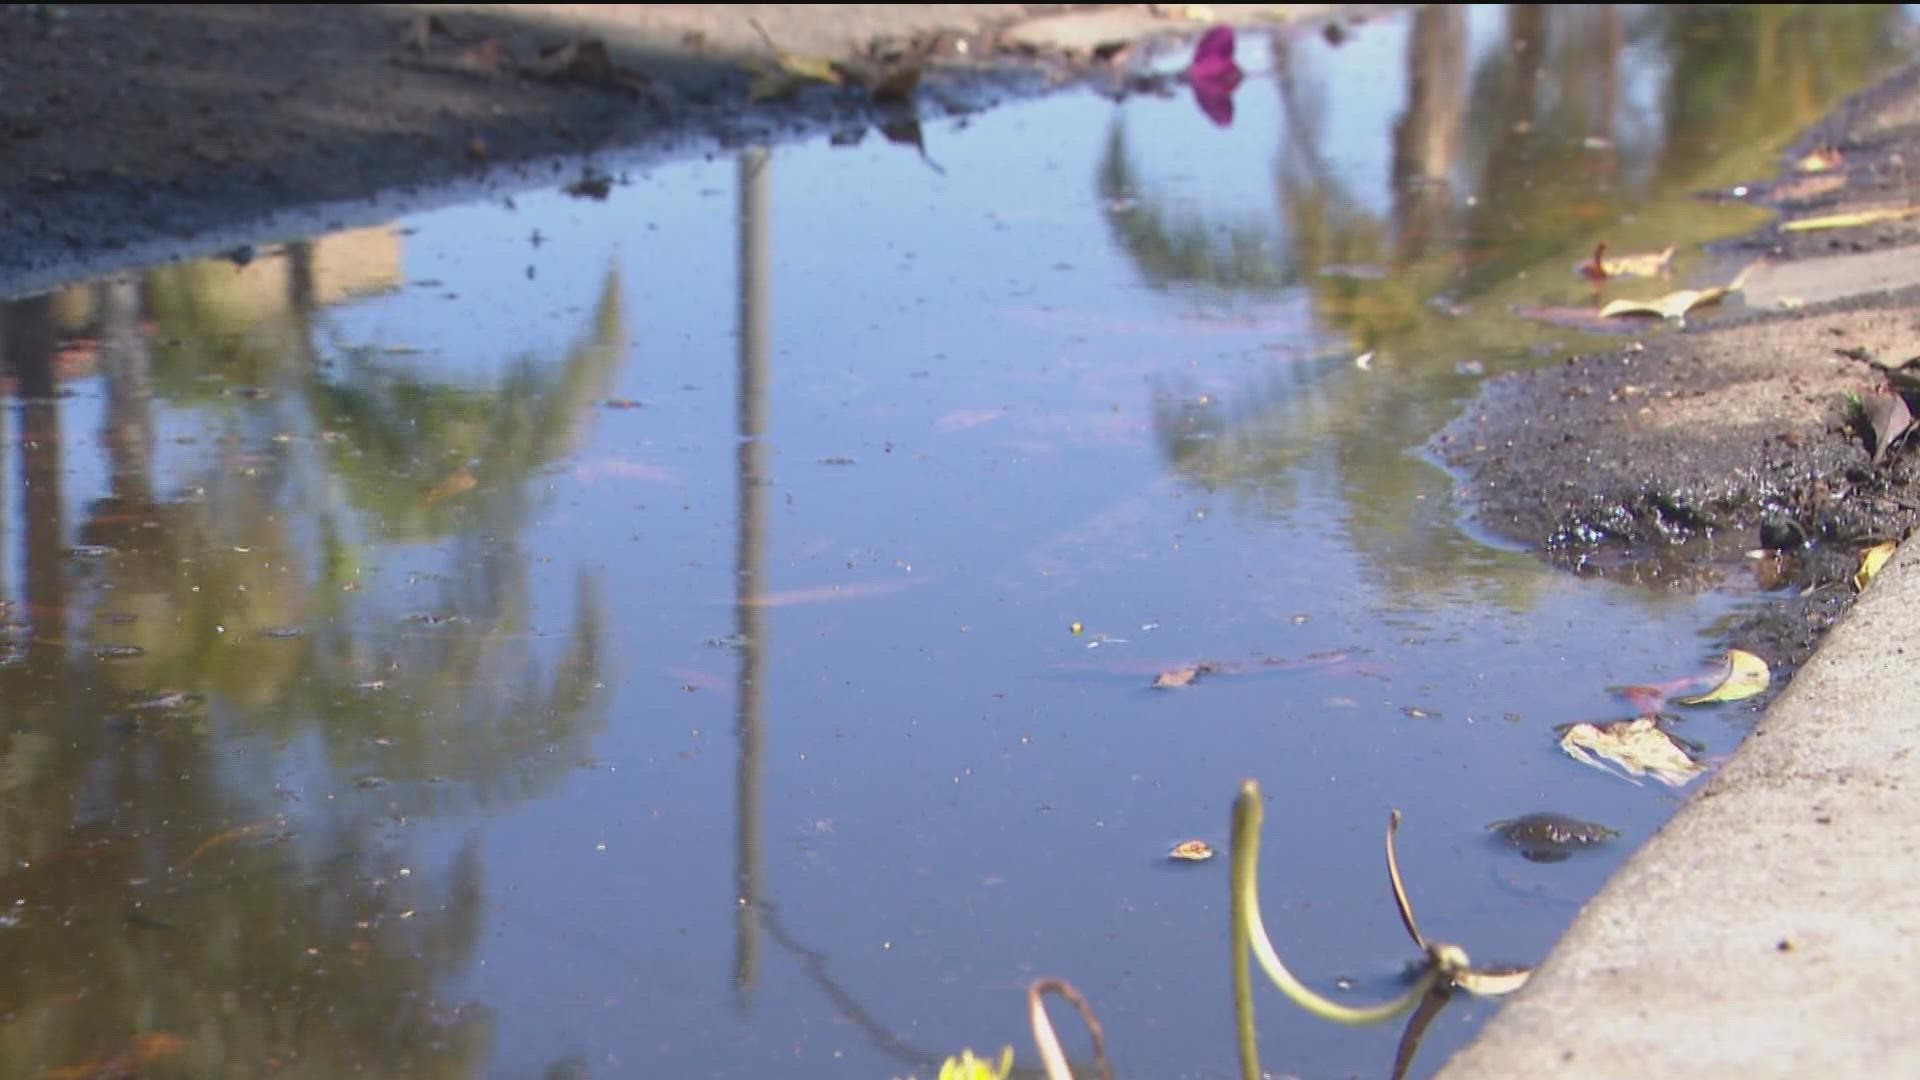 CBS 8 looks into water puddling up in North Park